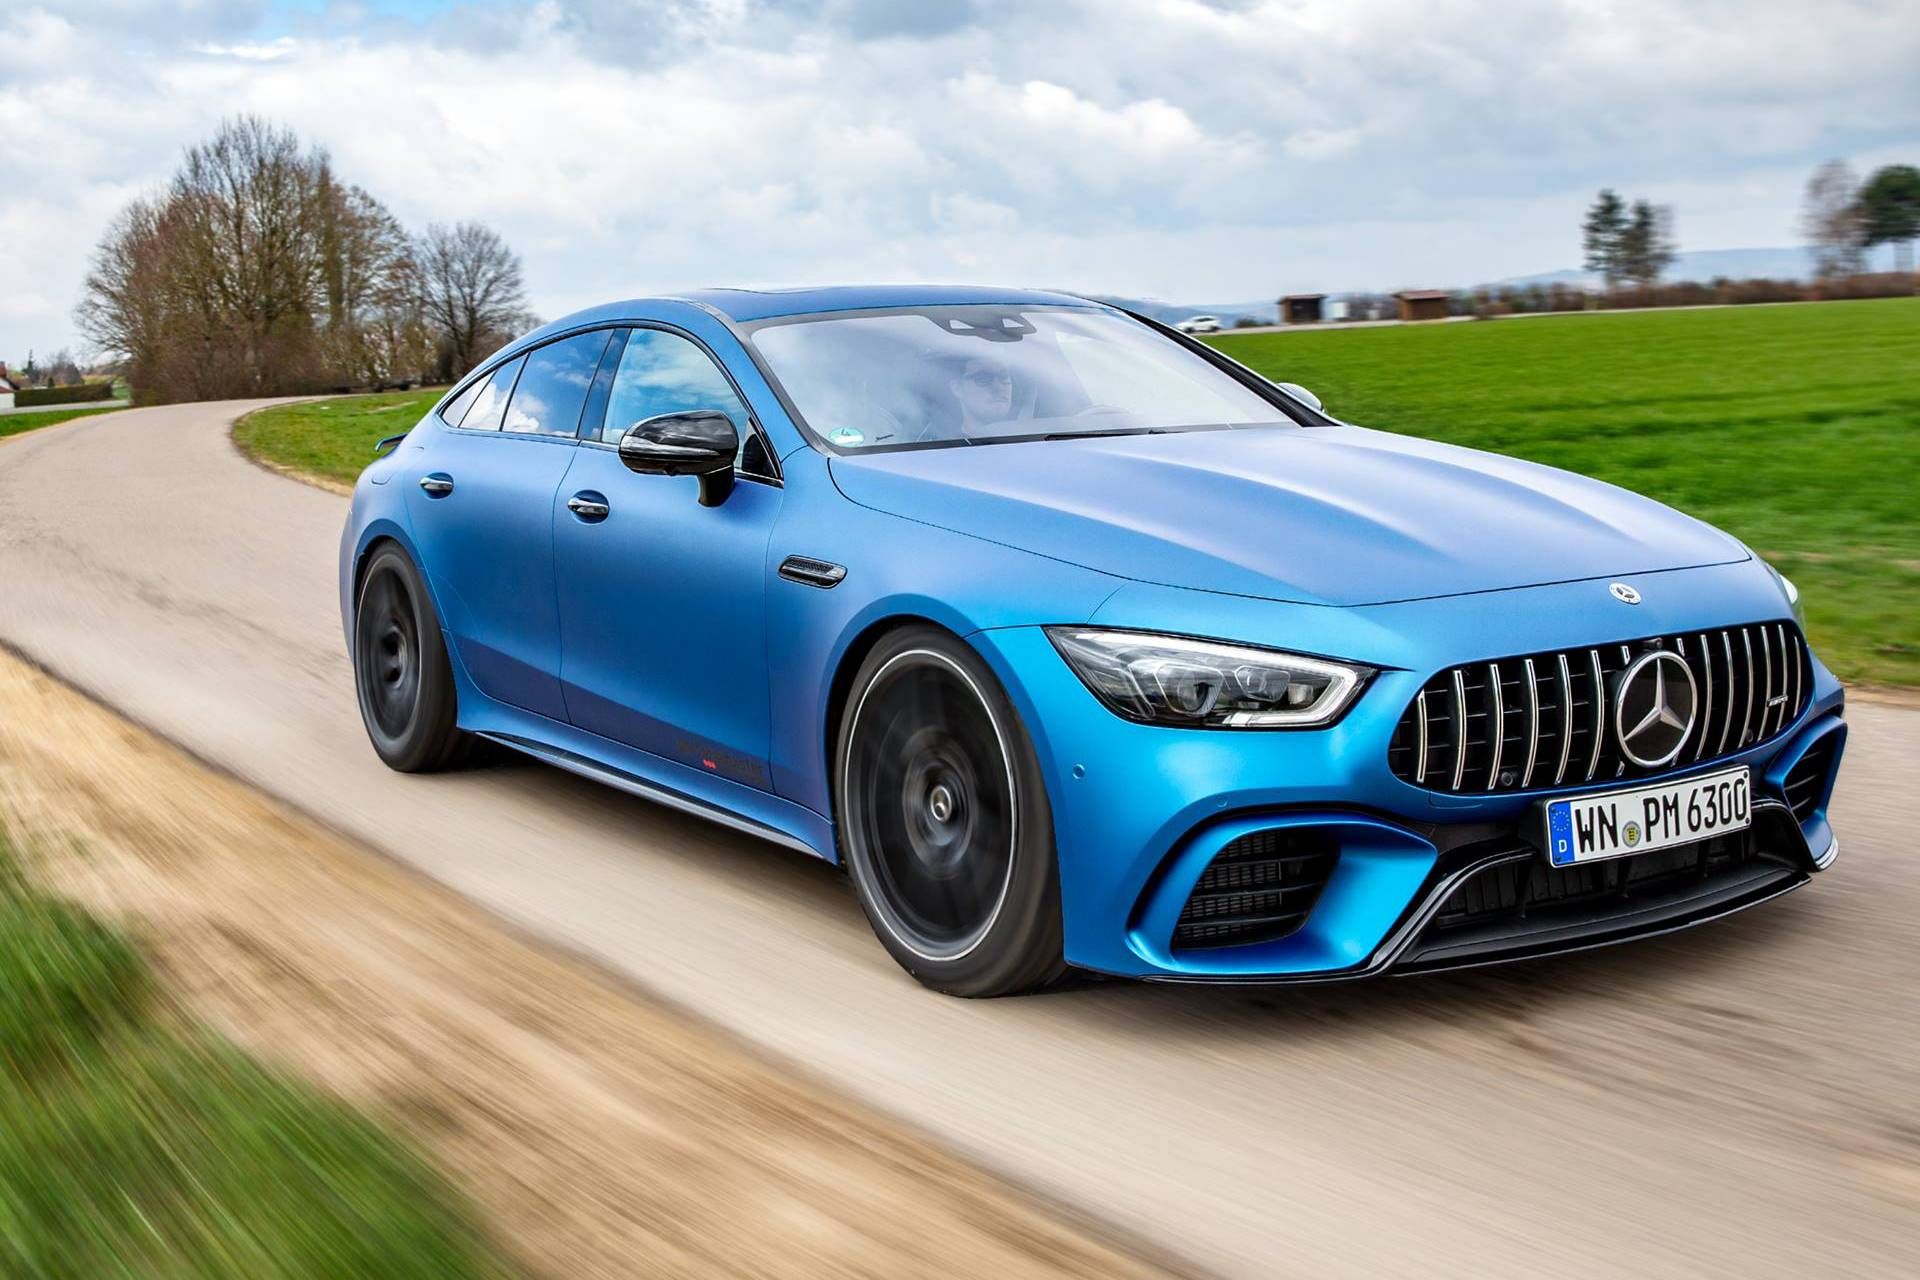 Ever Wondered How Fast the Mercedes-AMG GT 63 S Be When Properly Tuned?